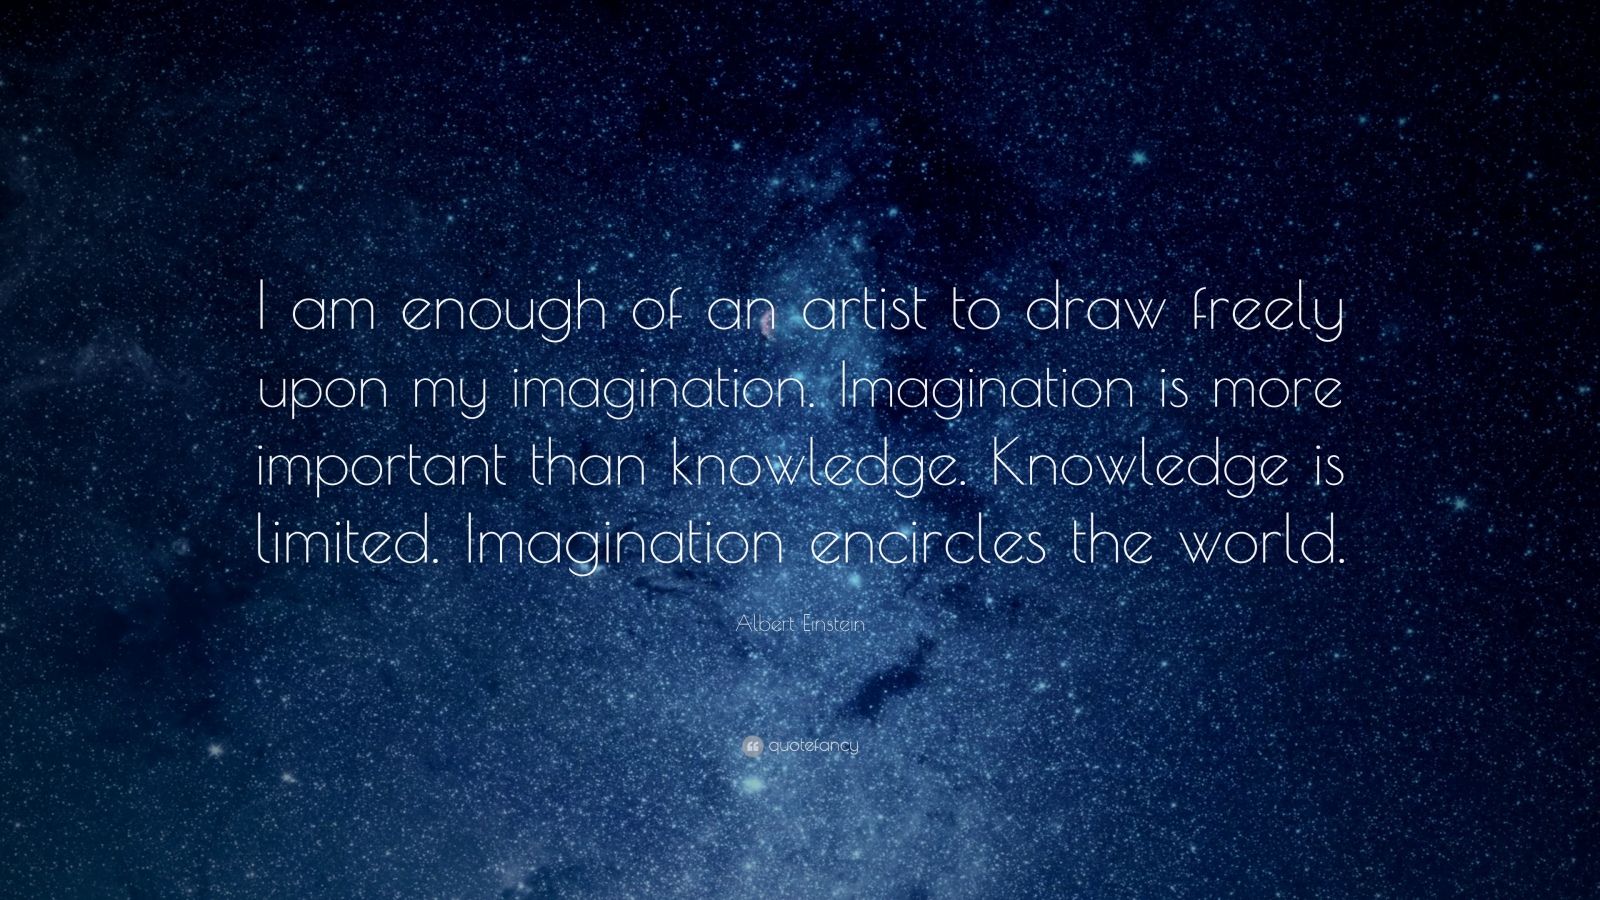 Albert Einstein Quote: “I am enough of an artist to draw freely upon my ...